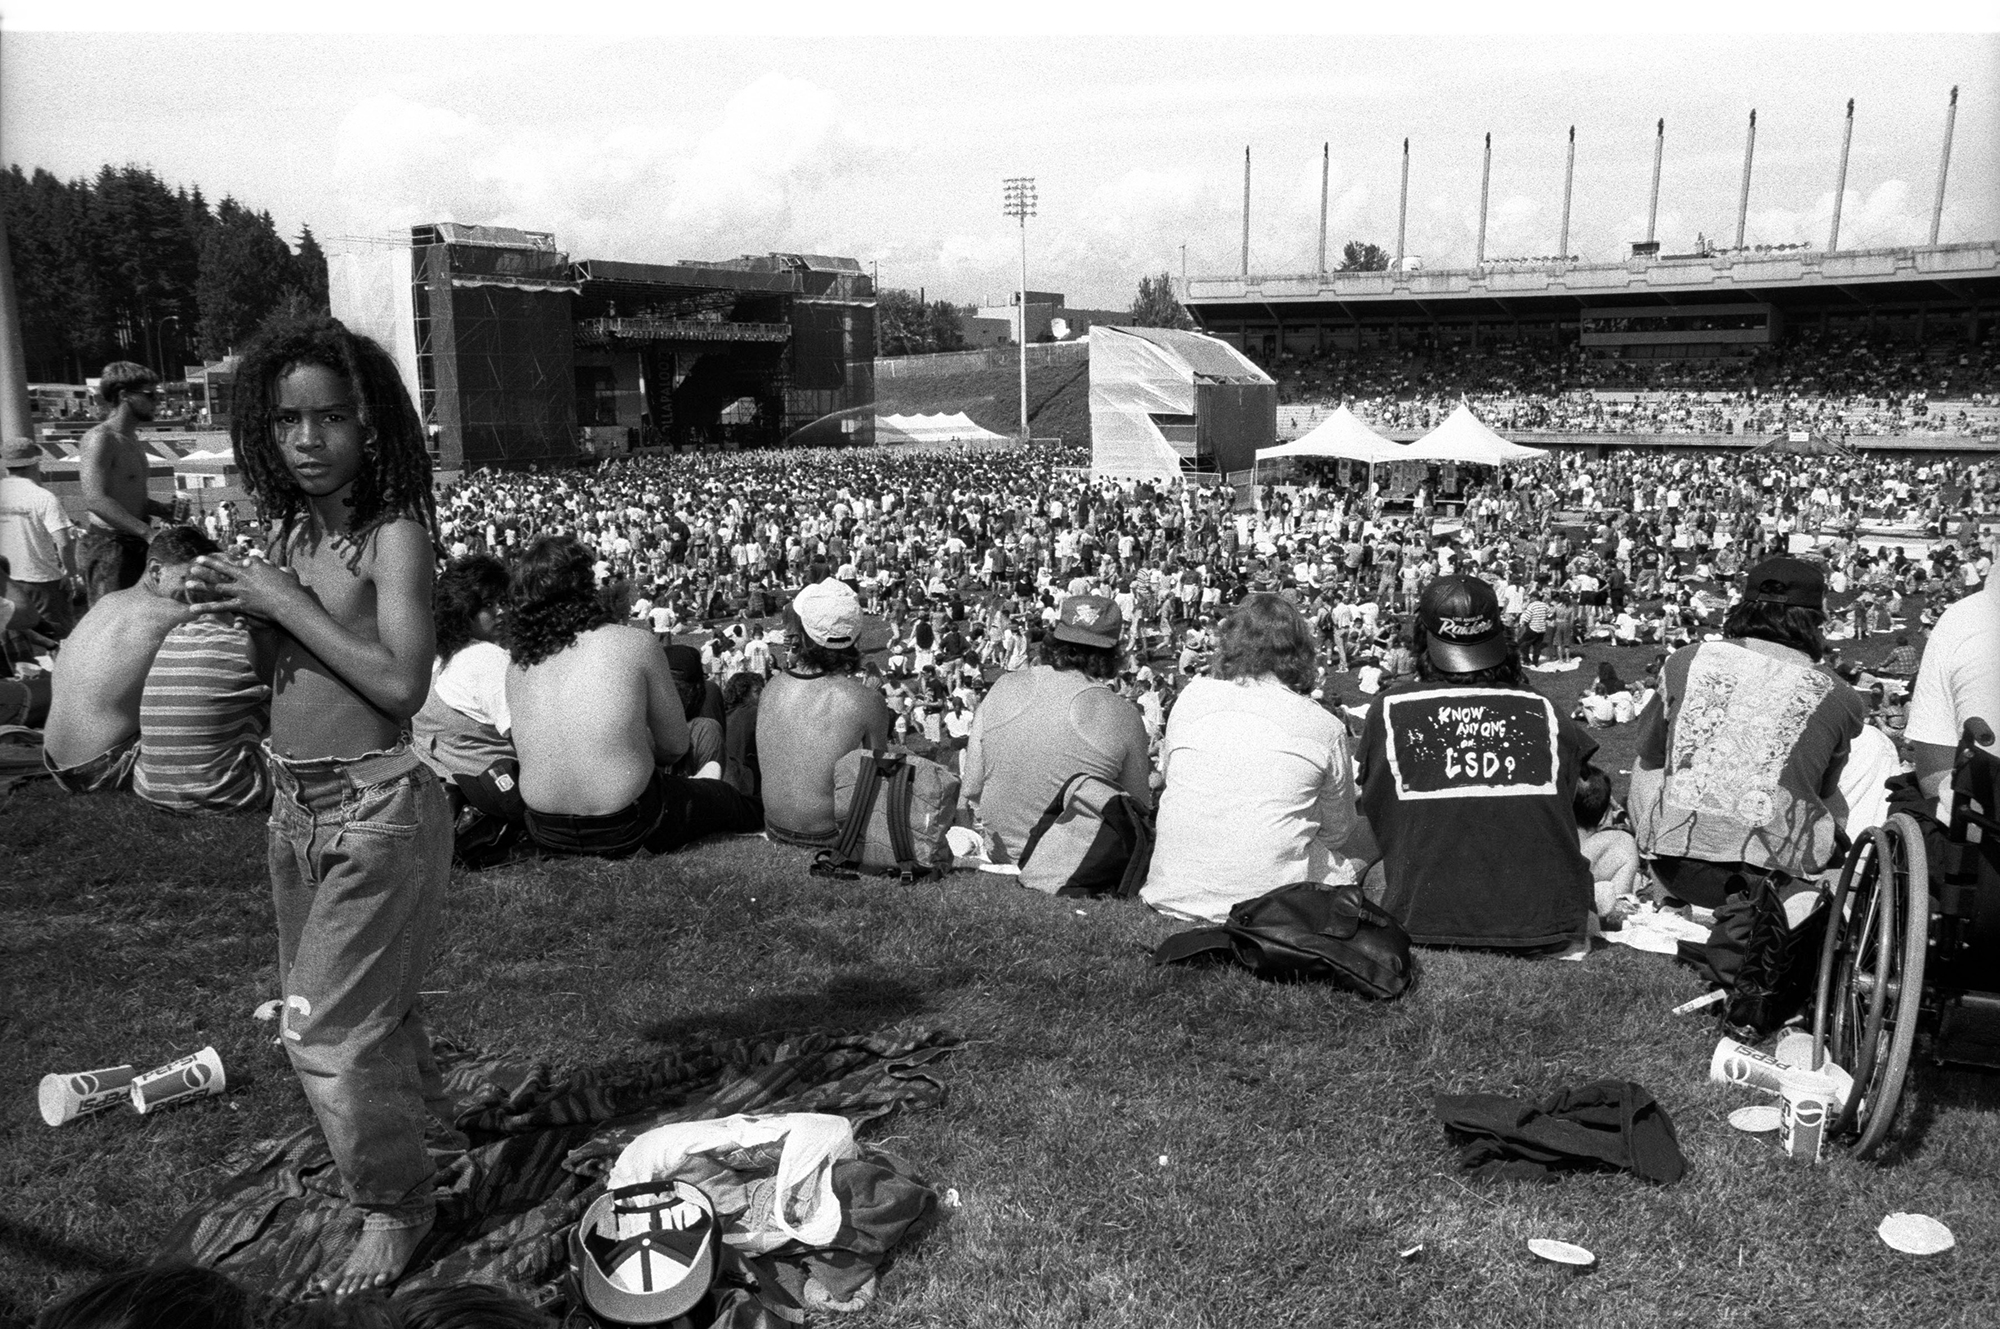 Lollapalooza Photos From the 1990s | Time